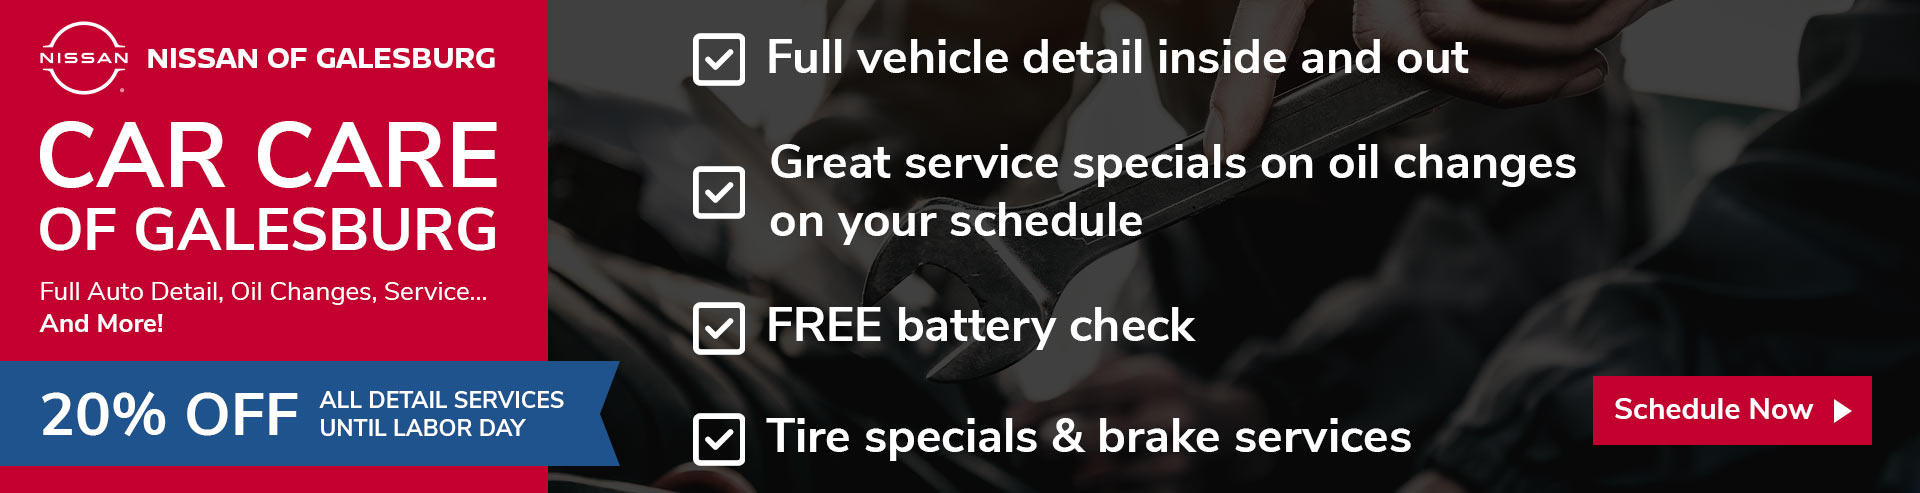 Care Care of Galesburg | Schedule Service Now